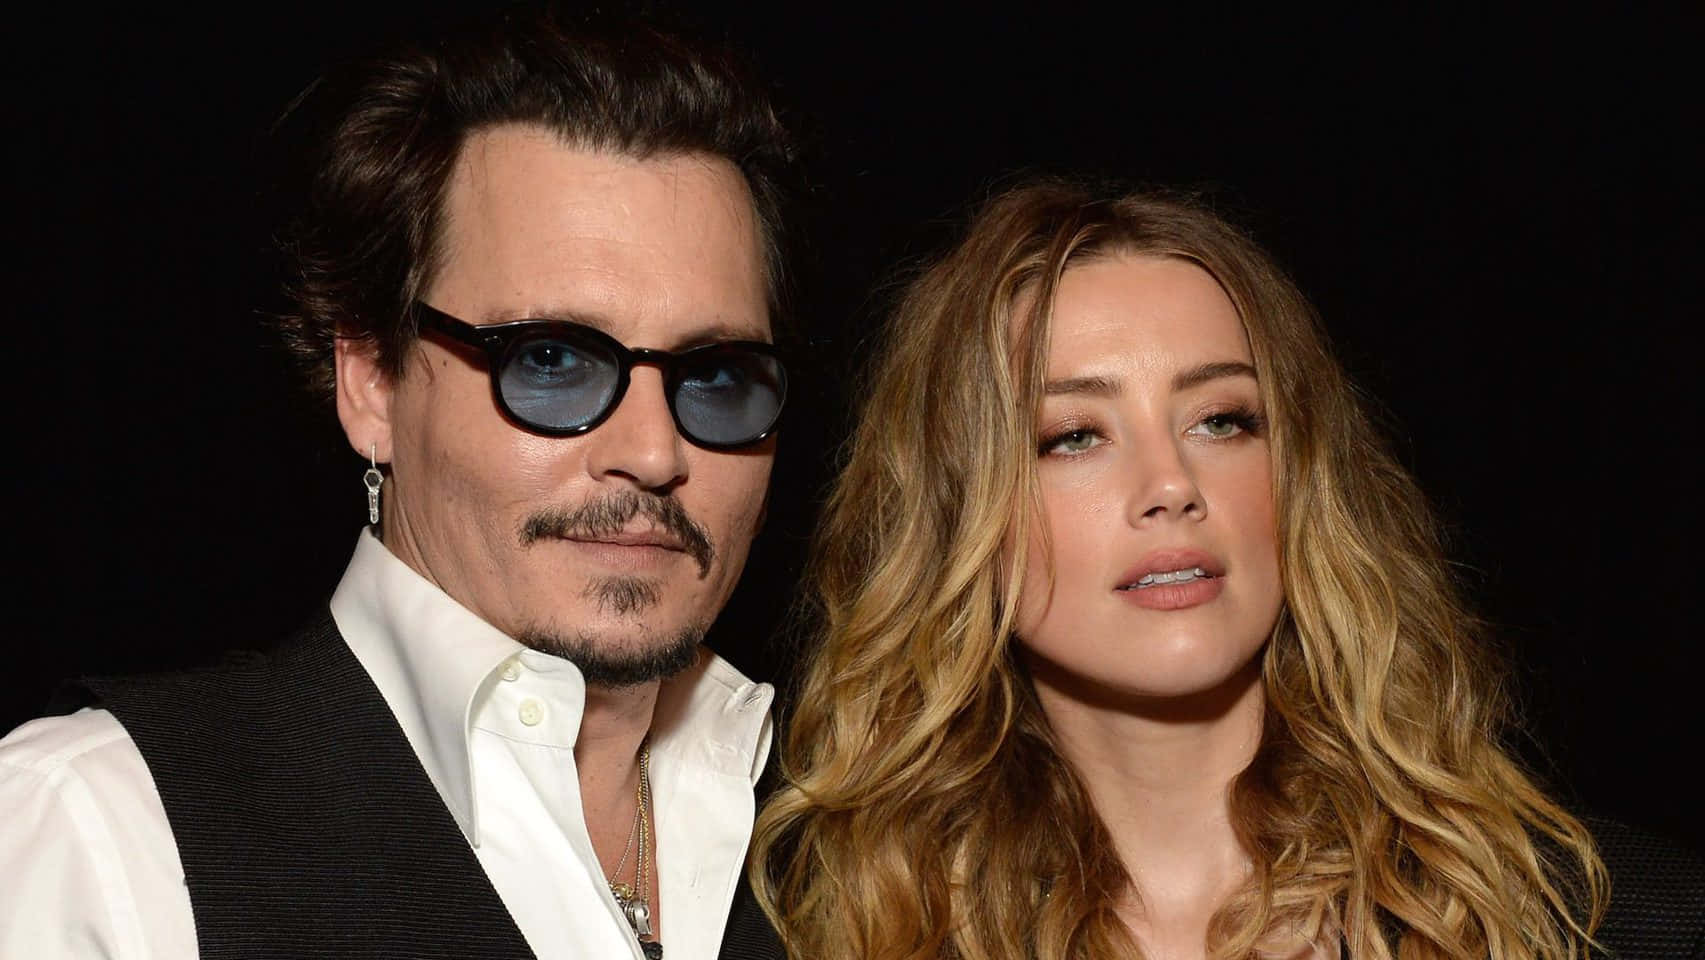 "Johnny Depp and Amber Heard in happier times".